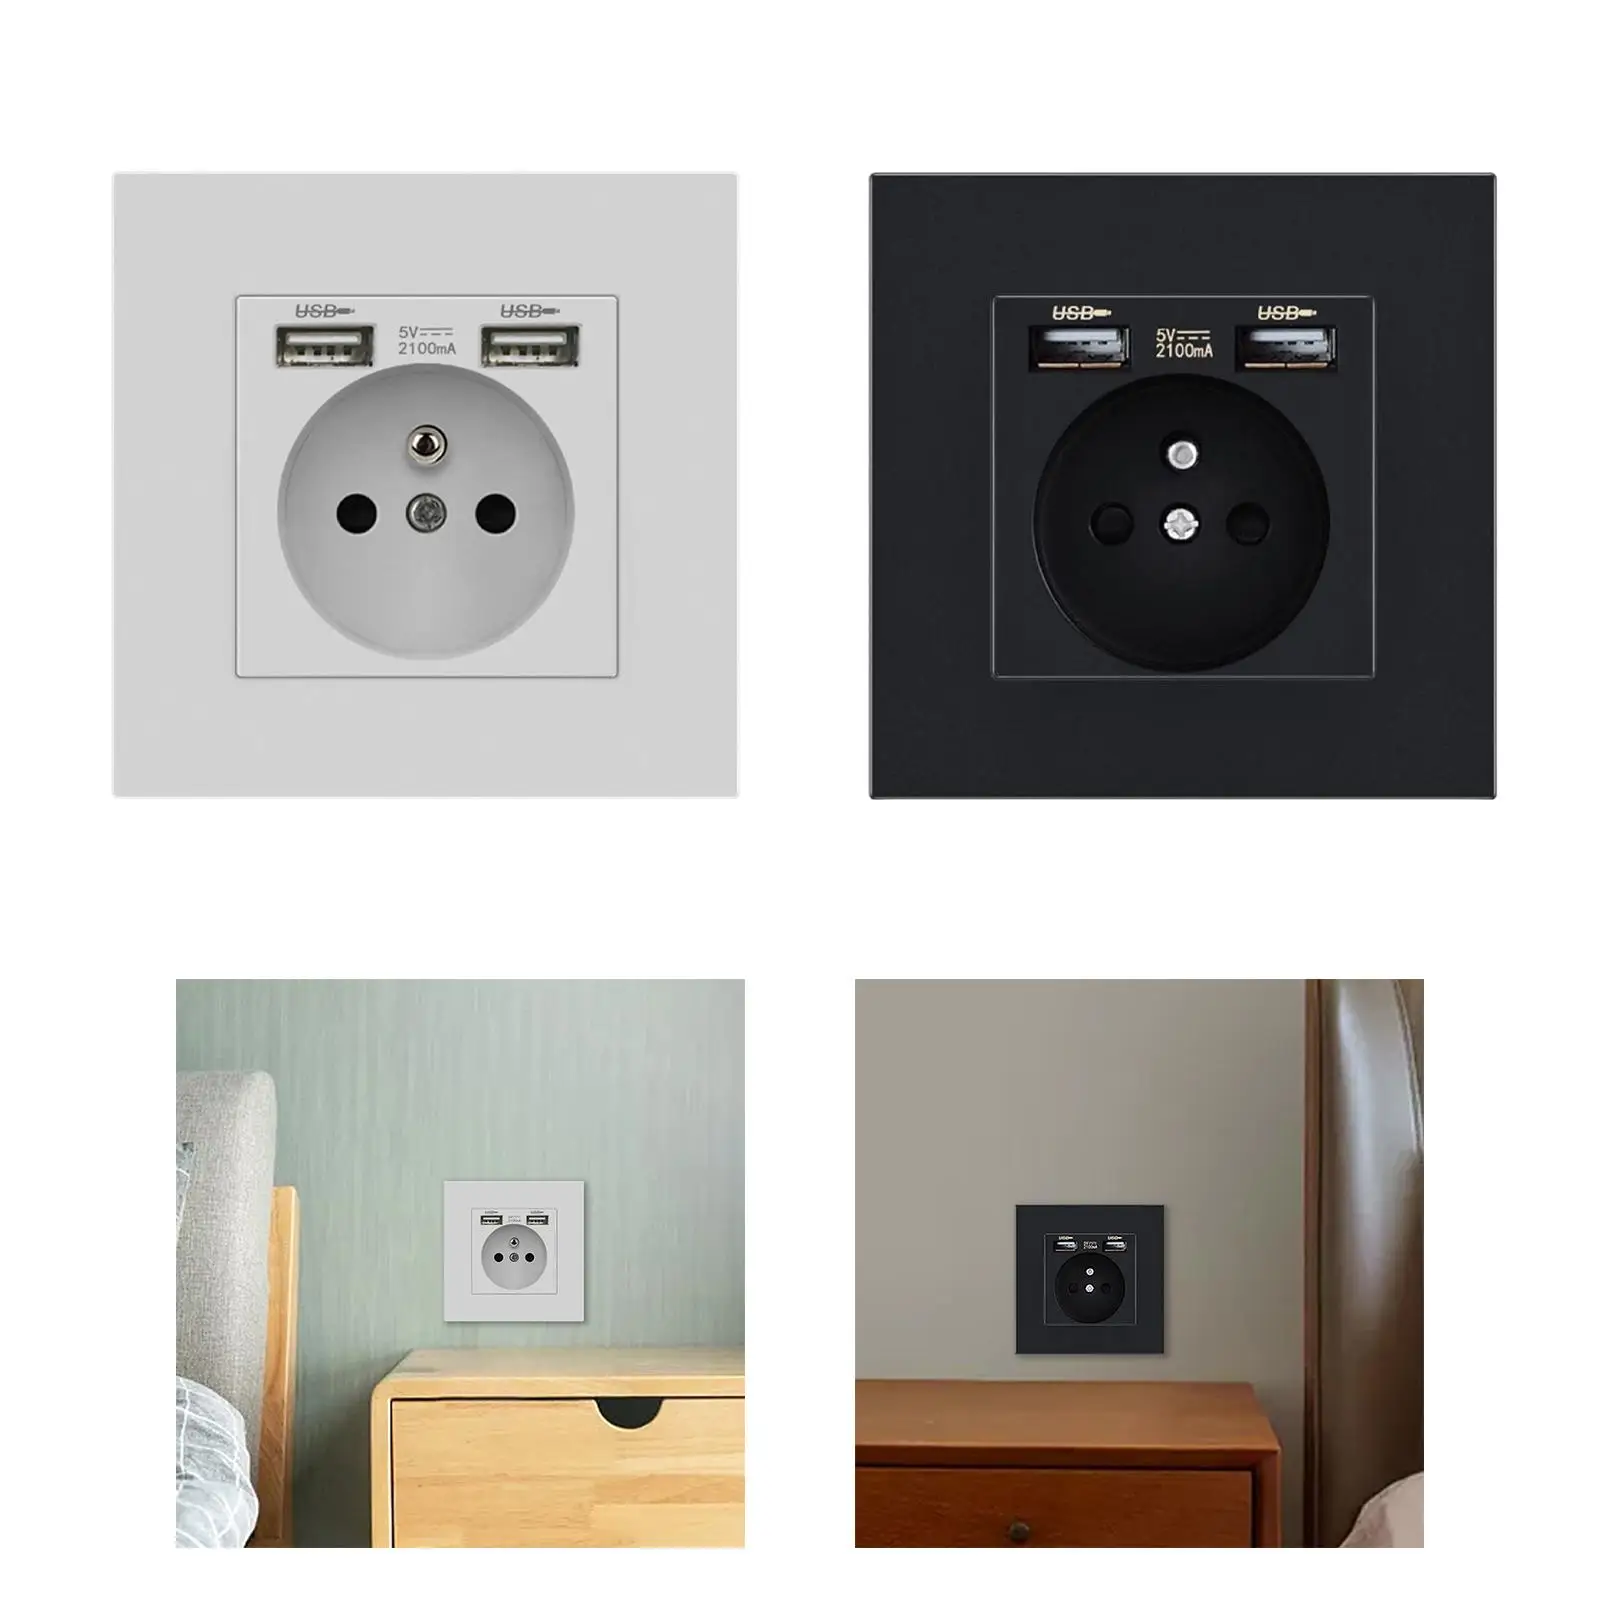 Power Socket with USB Charging Port Socket Electrical Socket for Home Office Household Appliances